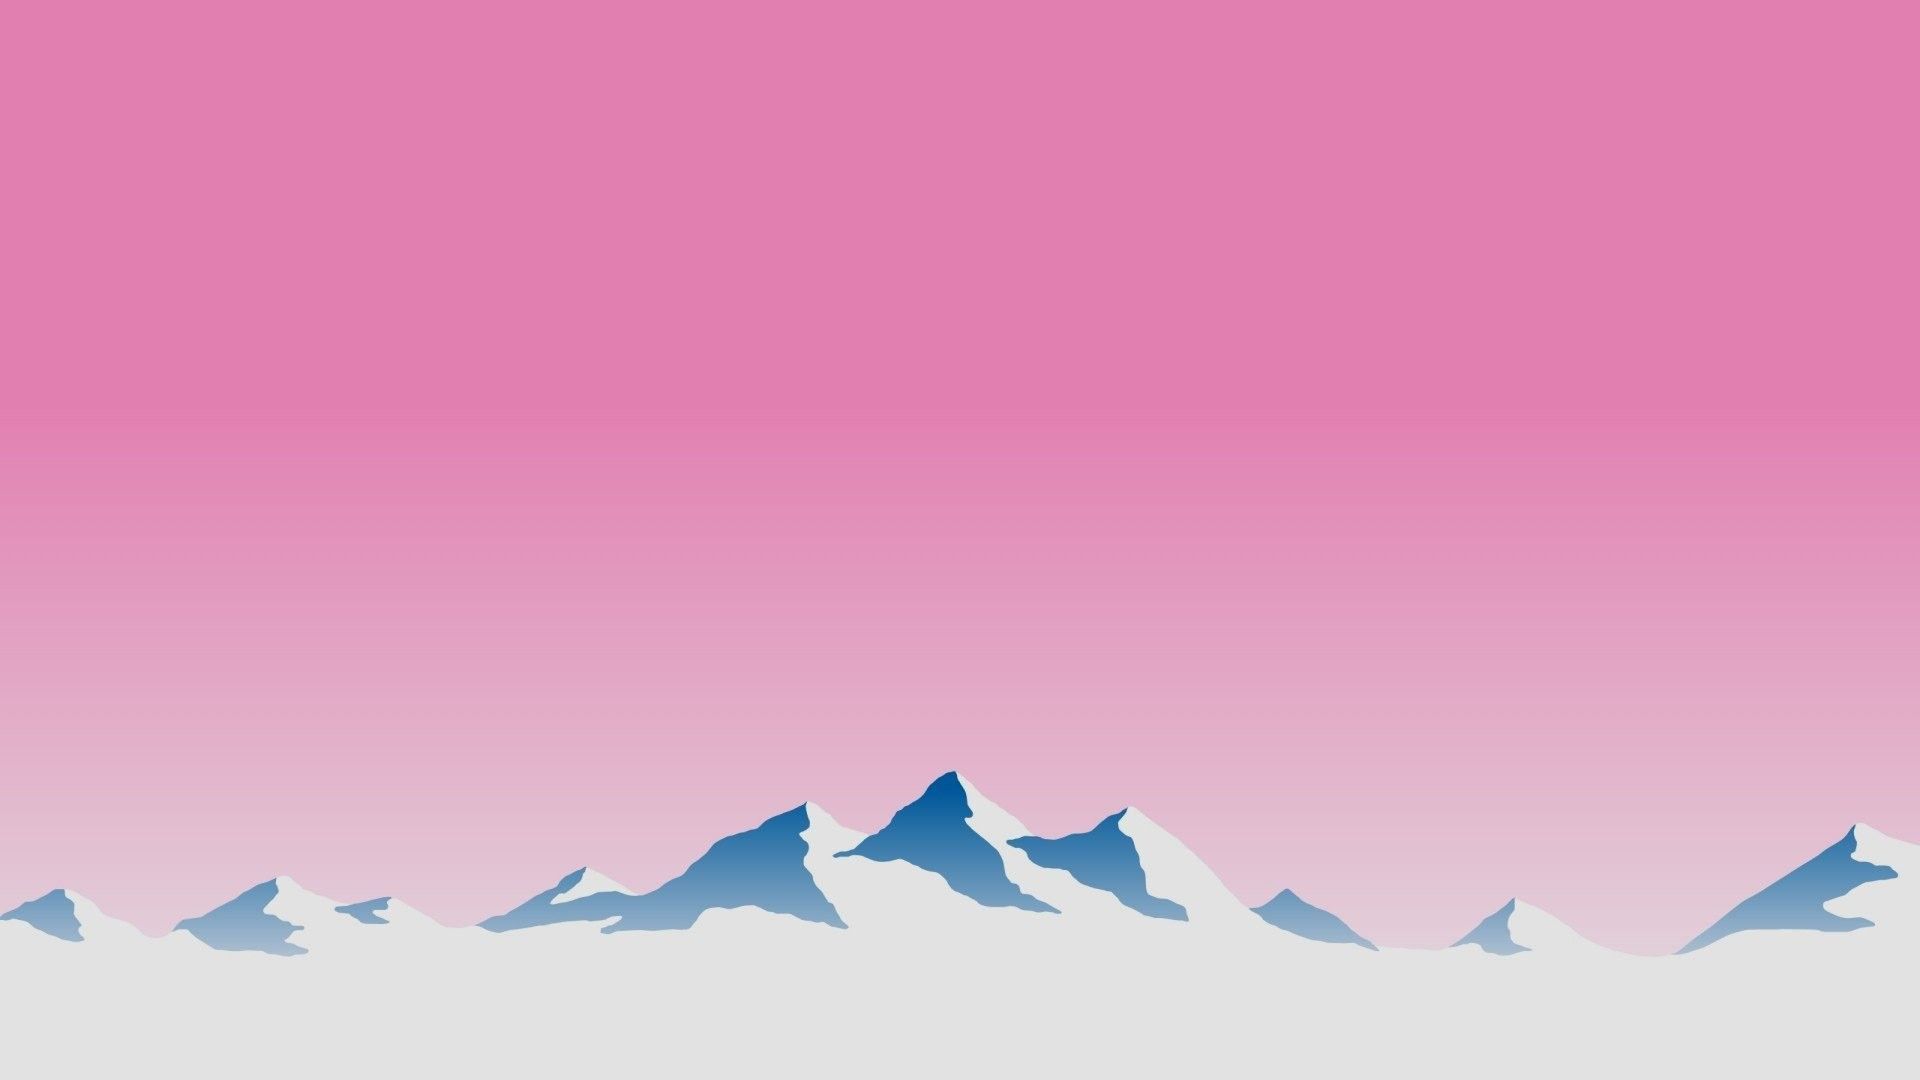 A pink mountain with snow on it - 1920x1080, computer